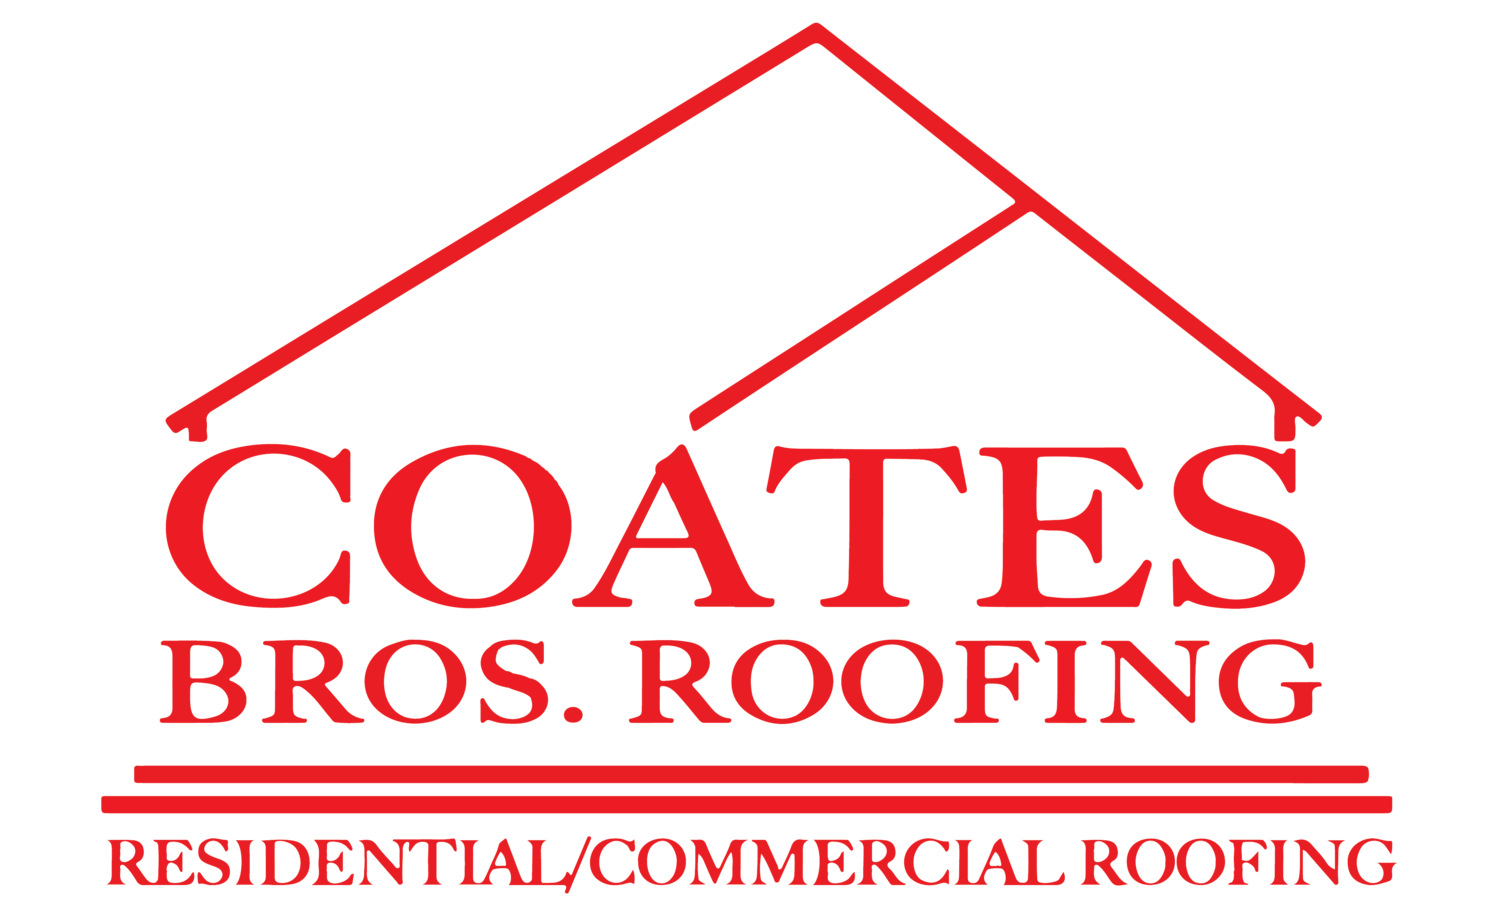 About - Coates Bros. Roofing